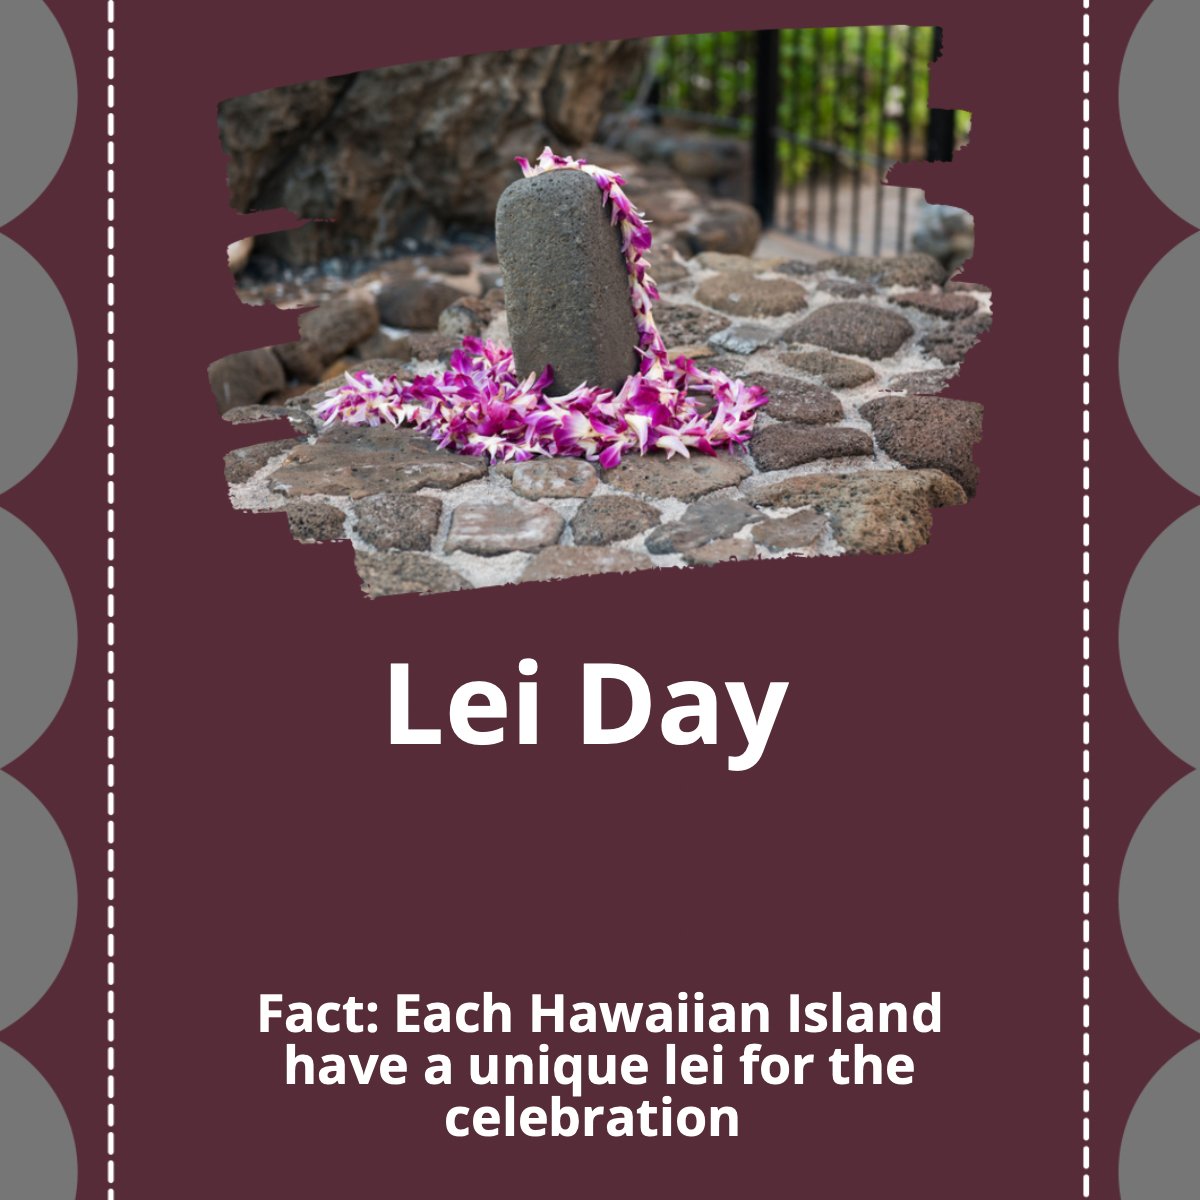 Happy Lei Day to all who celebrate 🙌!

Did you know? 🤔  Each Hawaiian island has a unique lei for the celebration. 😱

#lei #day #hawaii #flowers #celebration #grey
 #barbarabarker #barrettrealestate #barbarabarkerteam #realestate #scottsdale #chandler